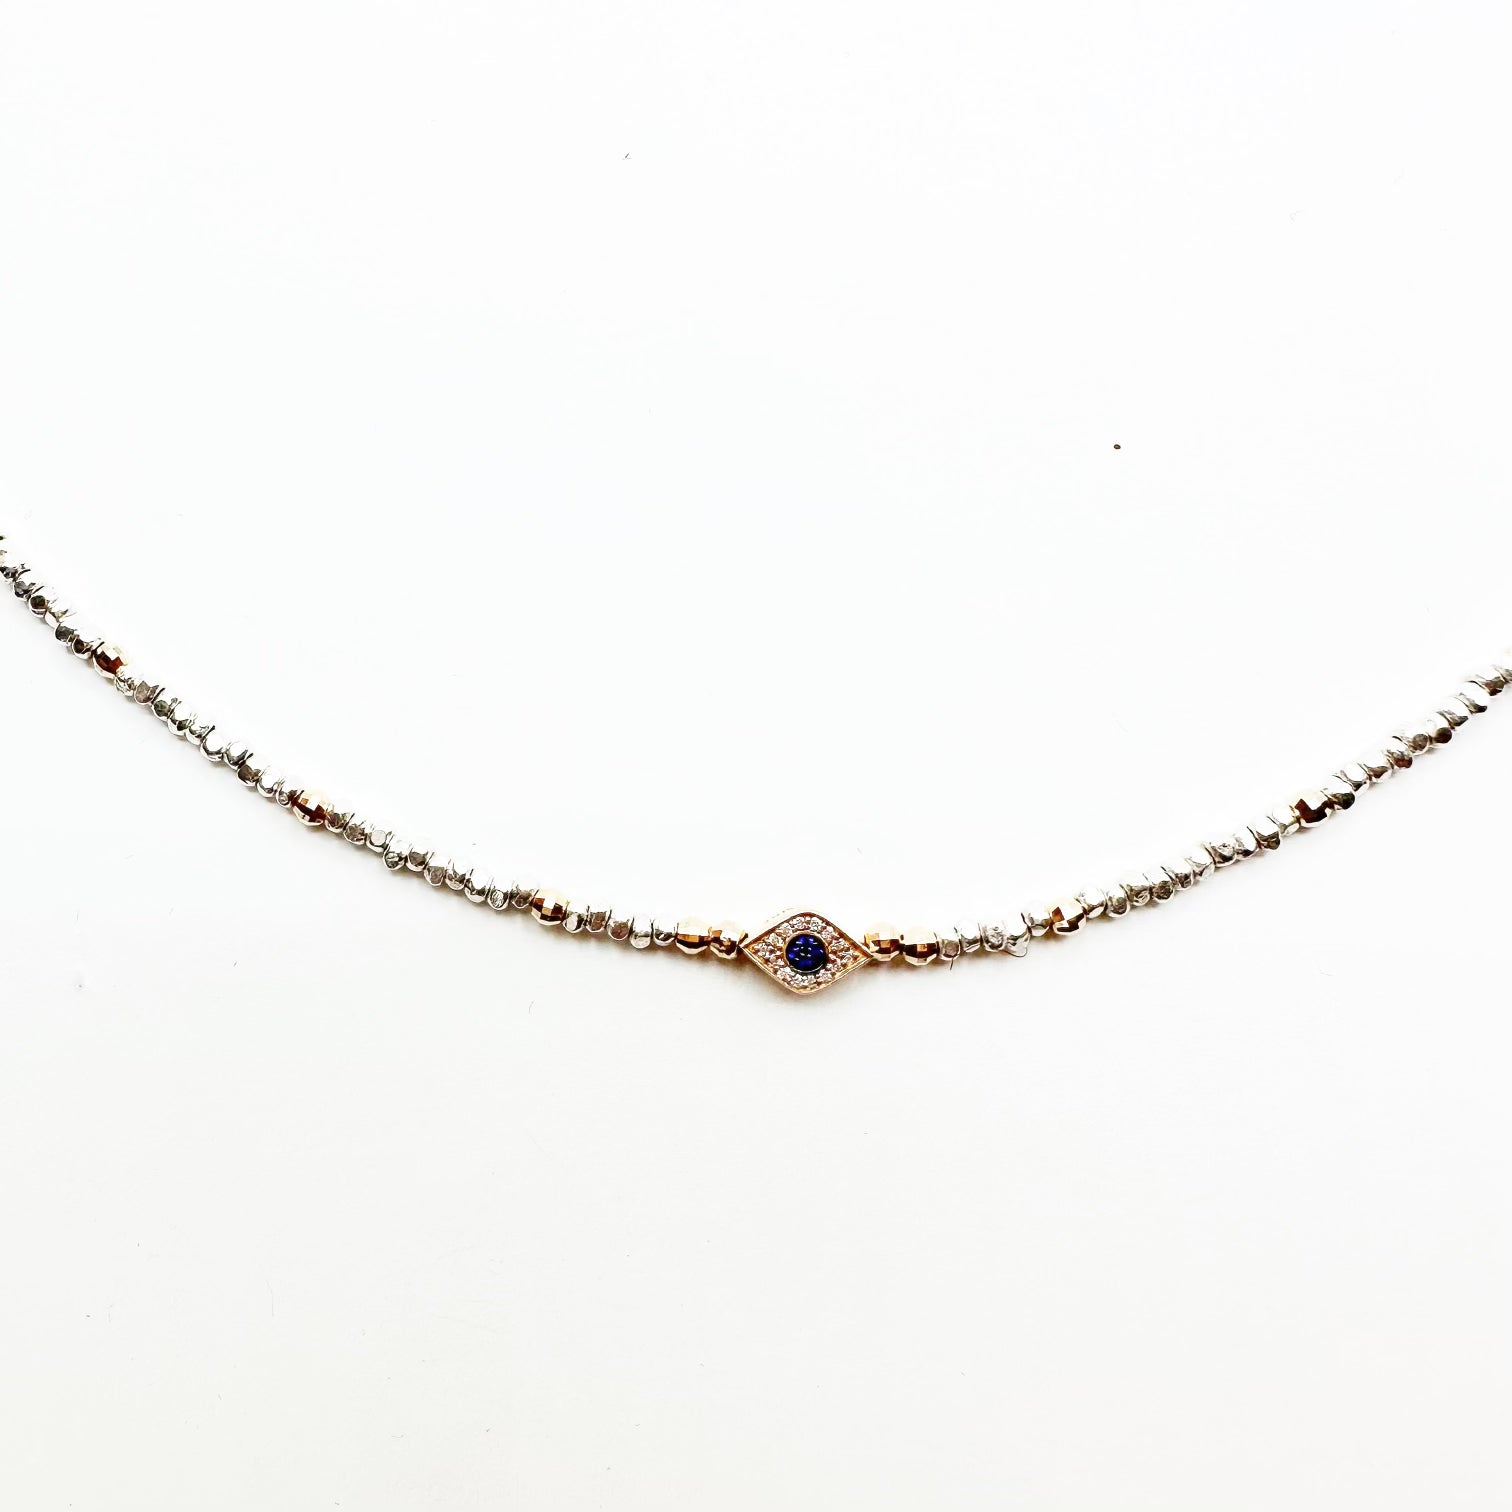 14K GOLD PROTECTION EYE NECKLACE WITH SILVER BEADS